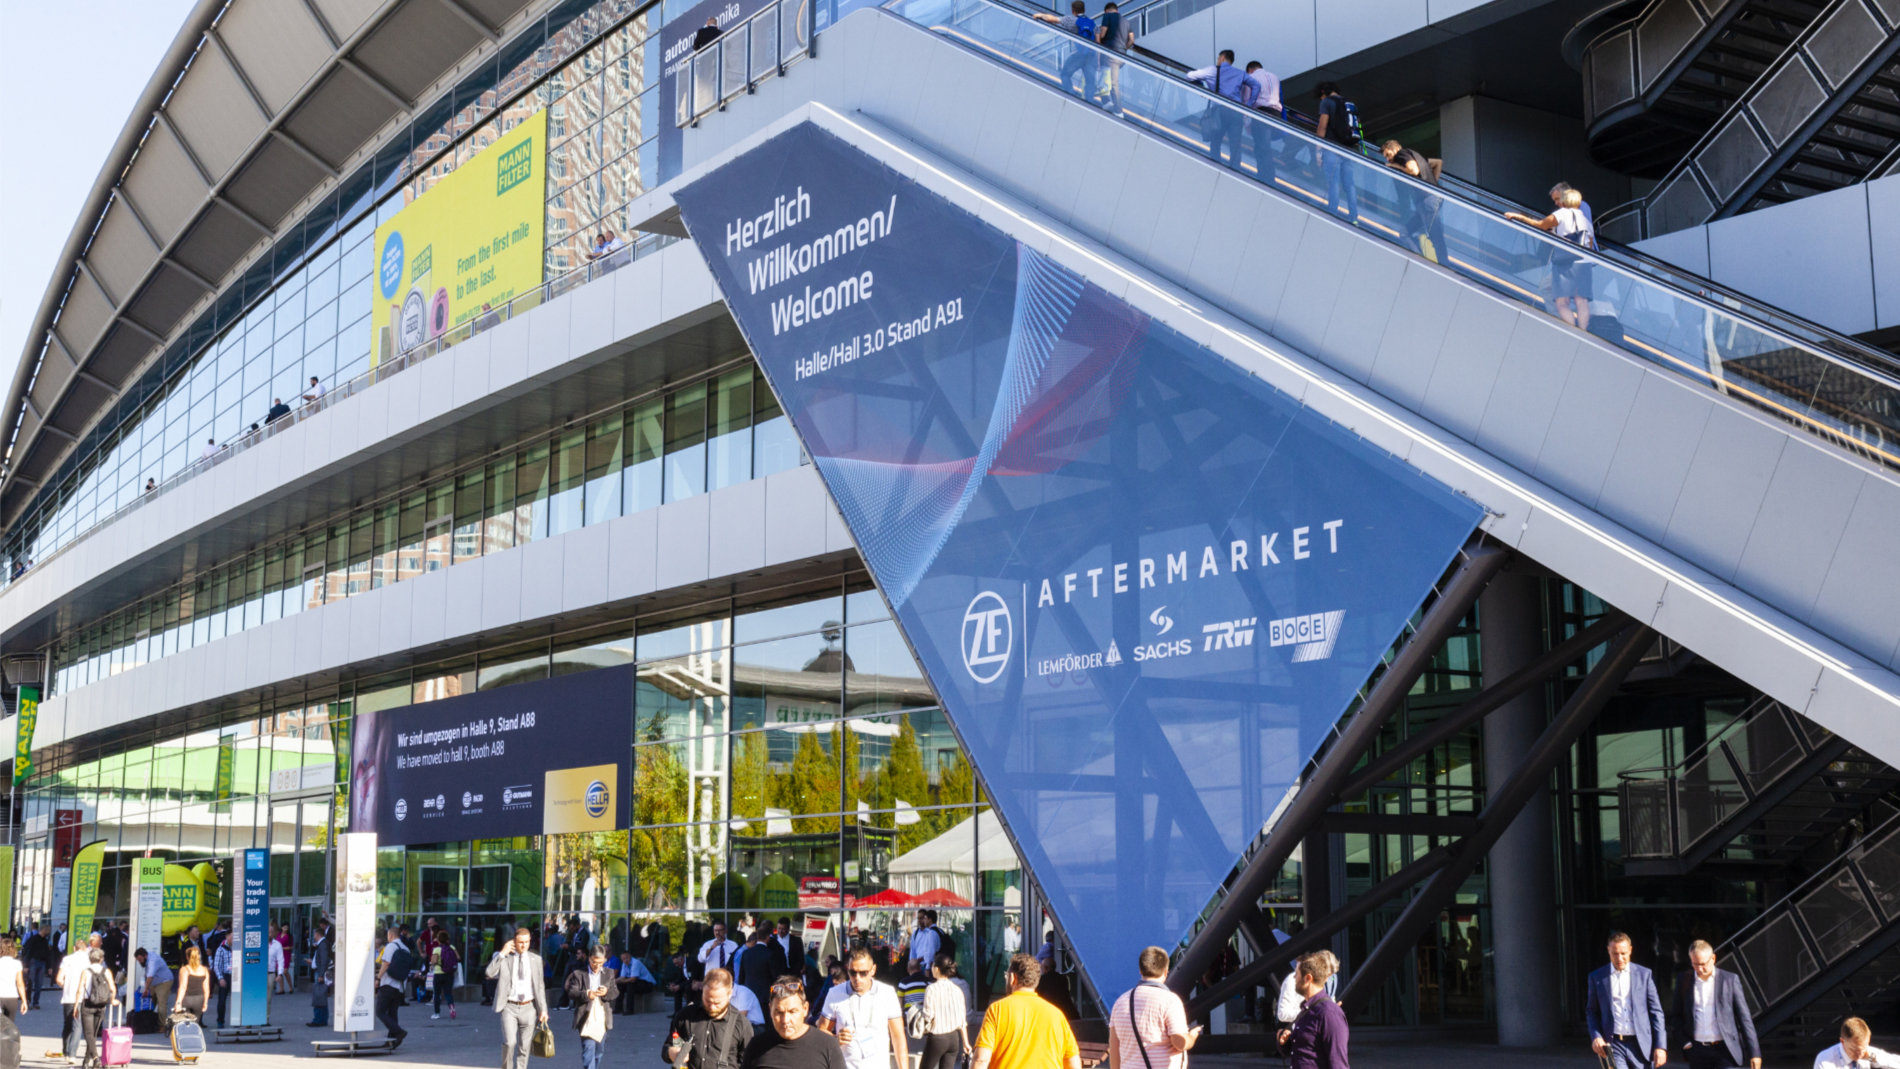 Advertising on the outdoor exhibition grounds of Messe Frankfurt